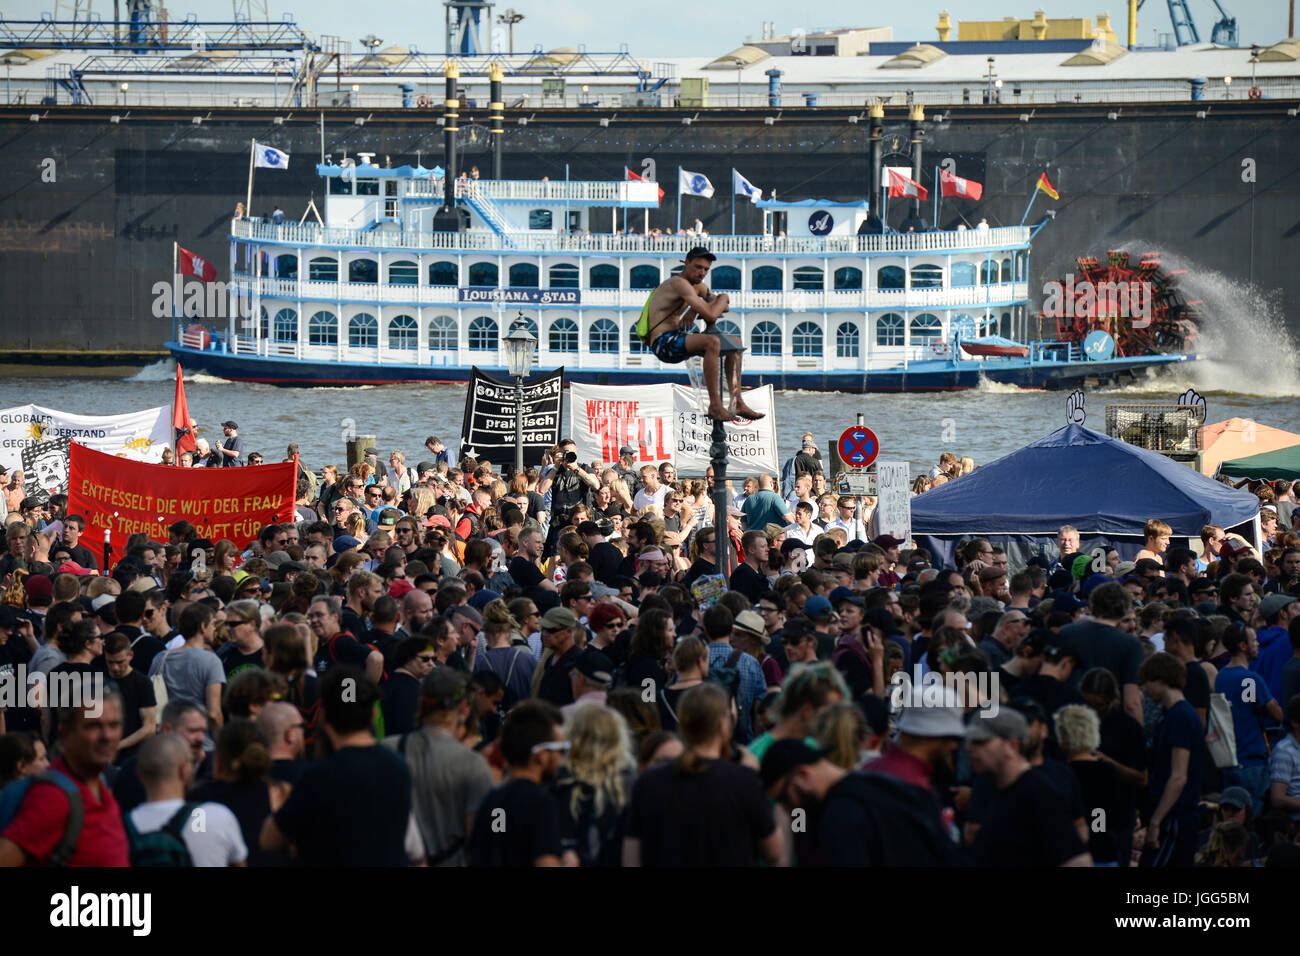 Hamburg, Germany. 6th July, 2017. protest rally 'G-20 WELCOME TO HELL' against G-20 summit in july 2017, behind river Elbe with boat and shipyard Blohm and Voss, Credit: Joerg Boethling/Alamy Live News Stock Photo